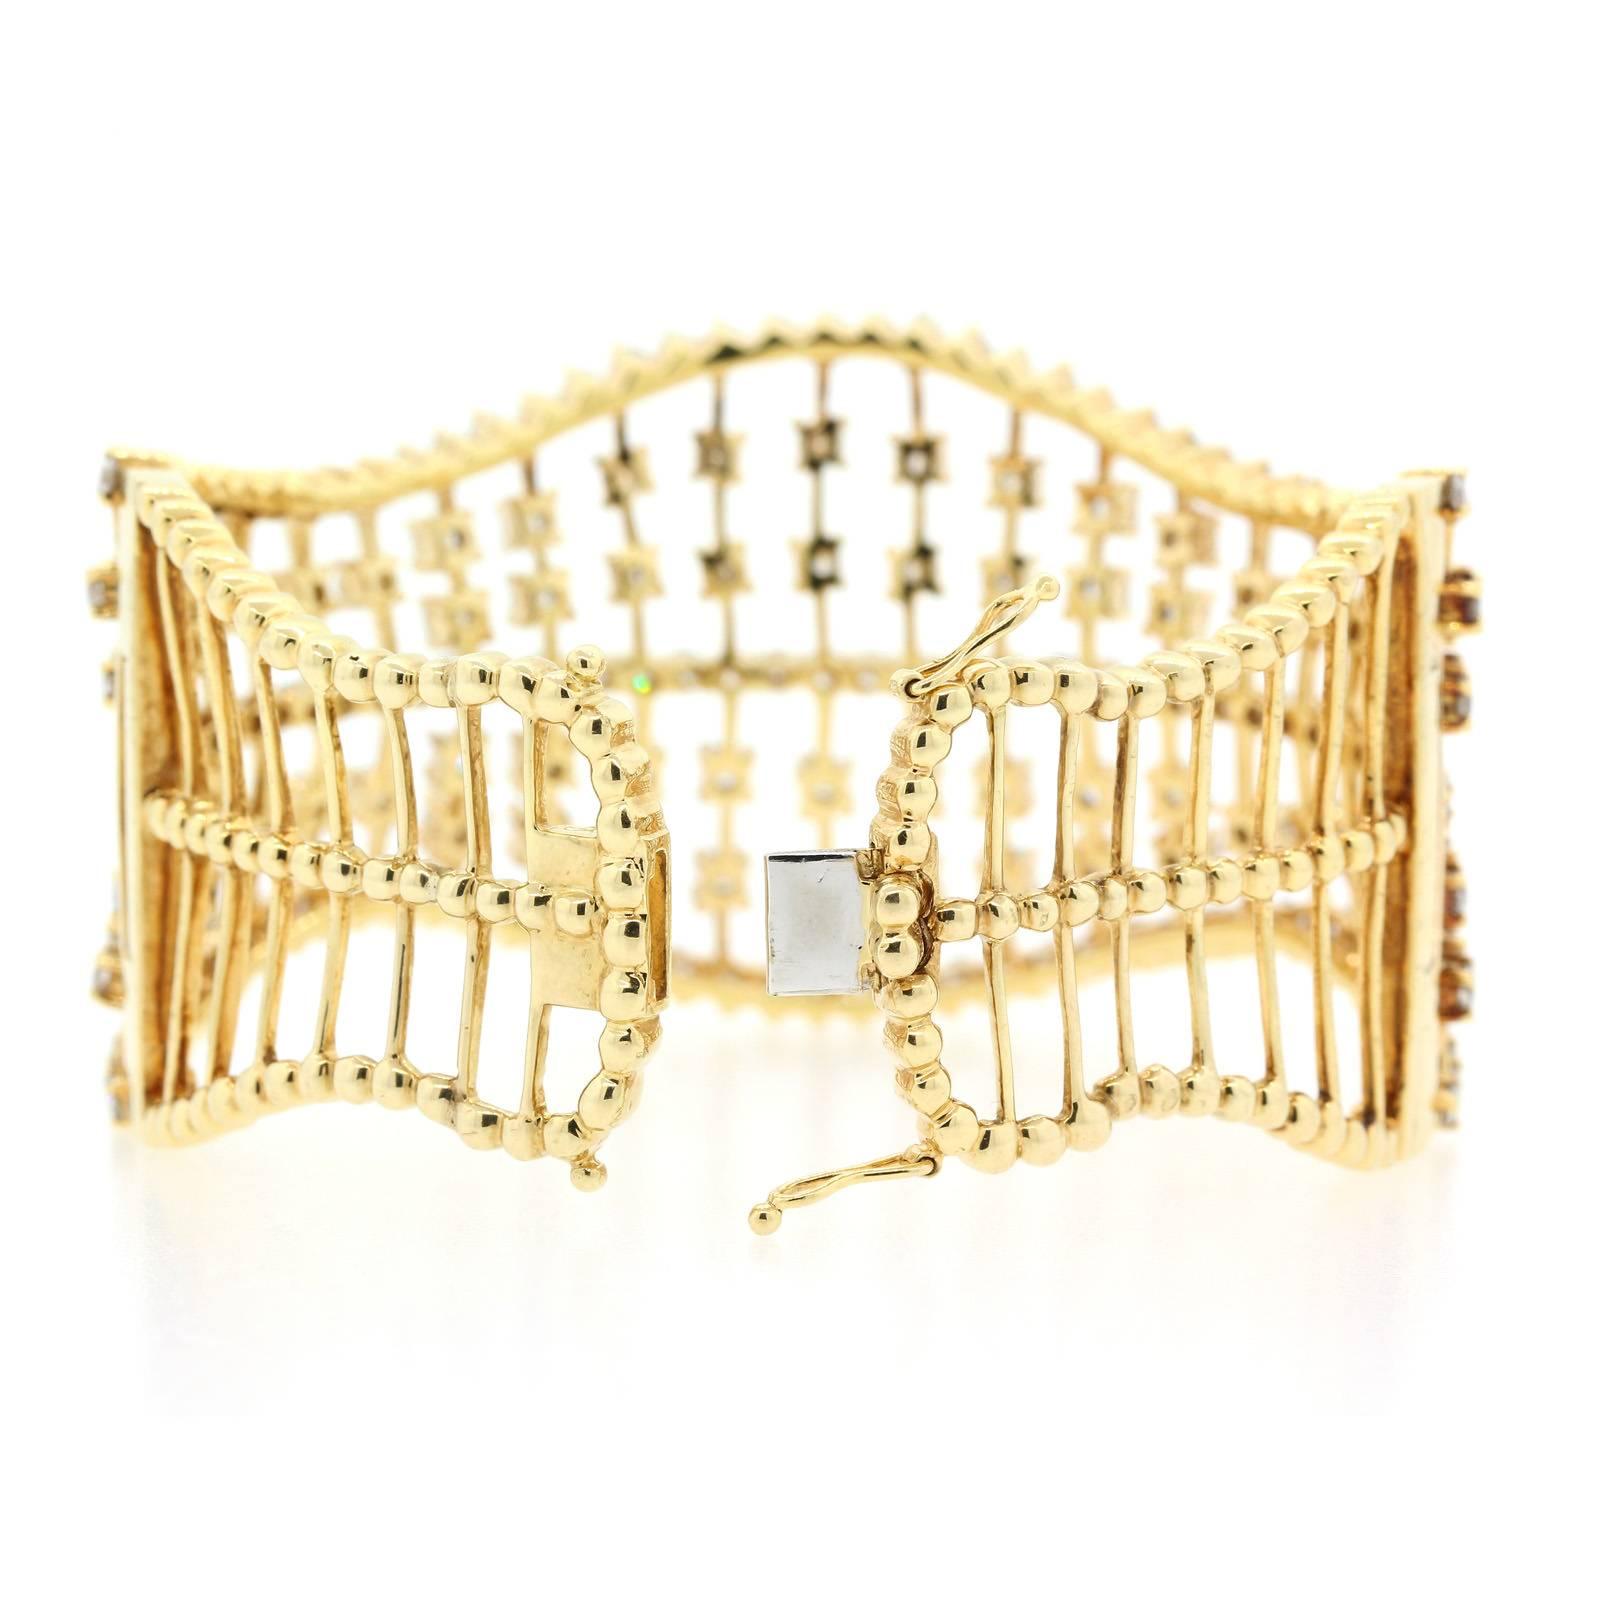 A fashionable 14KT yellow gold of open wire work and curvy lines cuff.   It is  beautifully set with 11.00 carat of Round Brilliant Cut Diamond of shimmering  H color - VS/SI clarity.  The bracelet fits a medium size wrist.  It is a bright bracelet